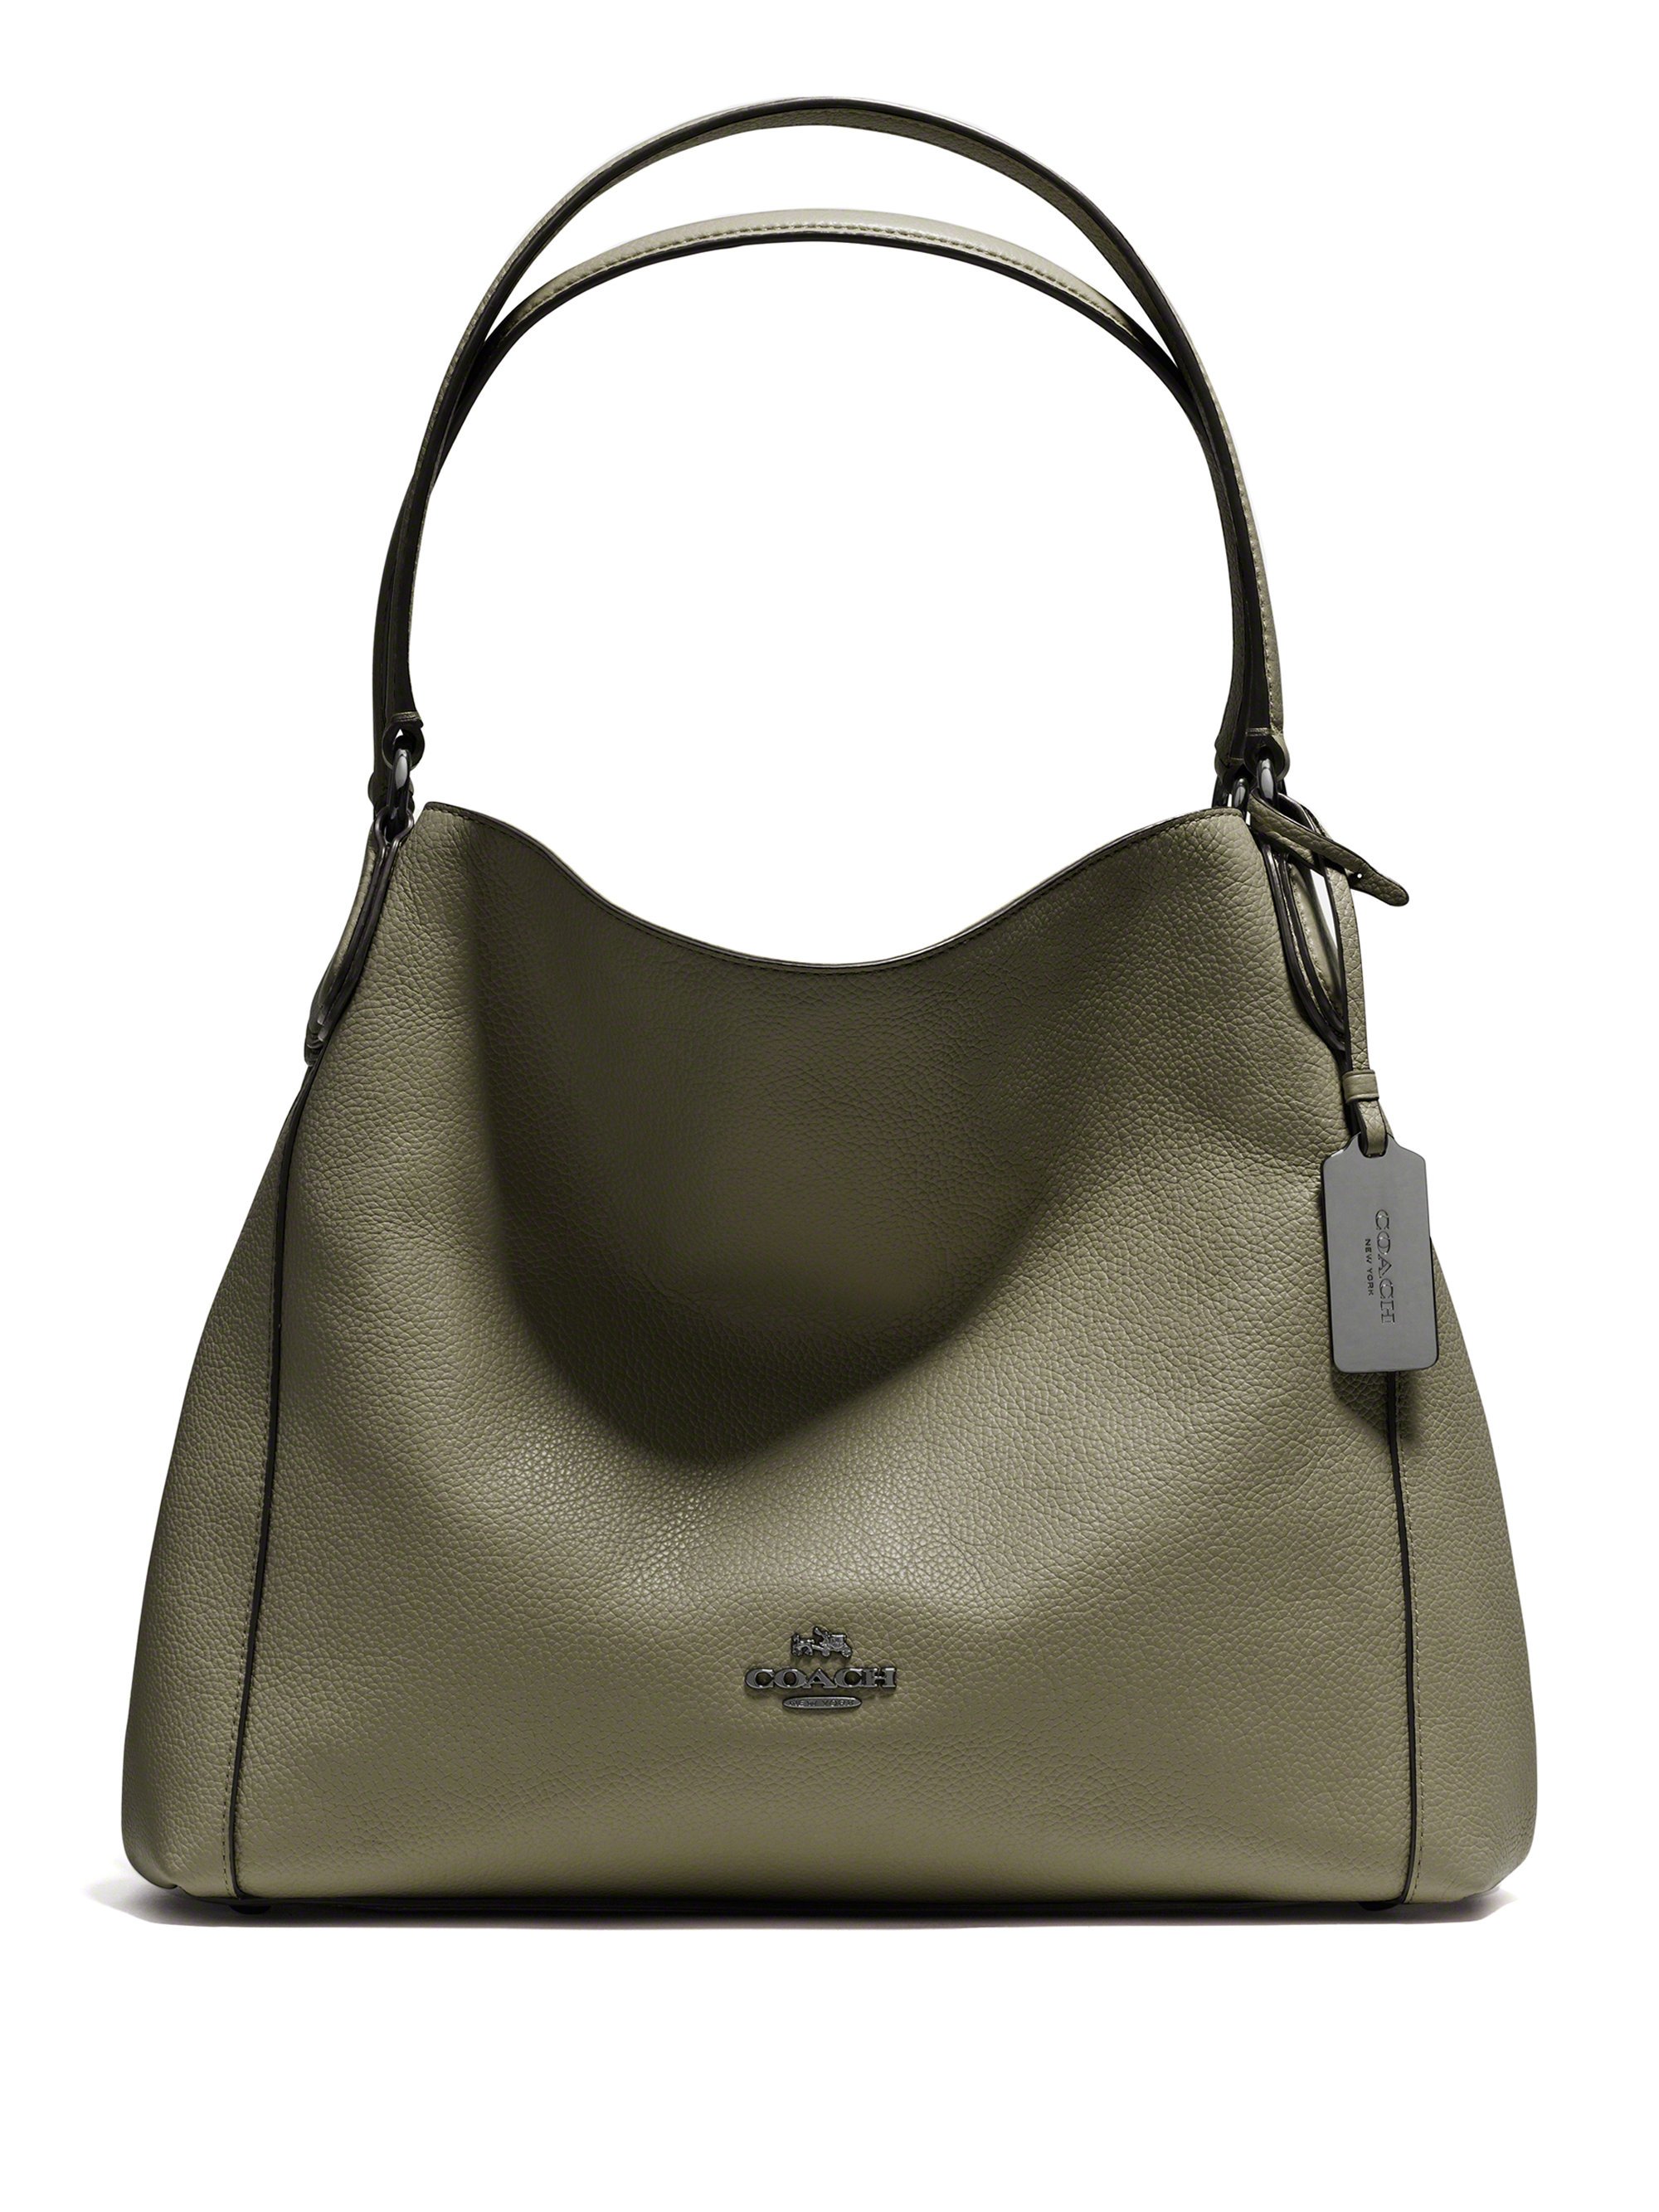 COACH Edie Pebbled Leather Shoulder Bag in Green - Lyst